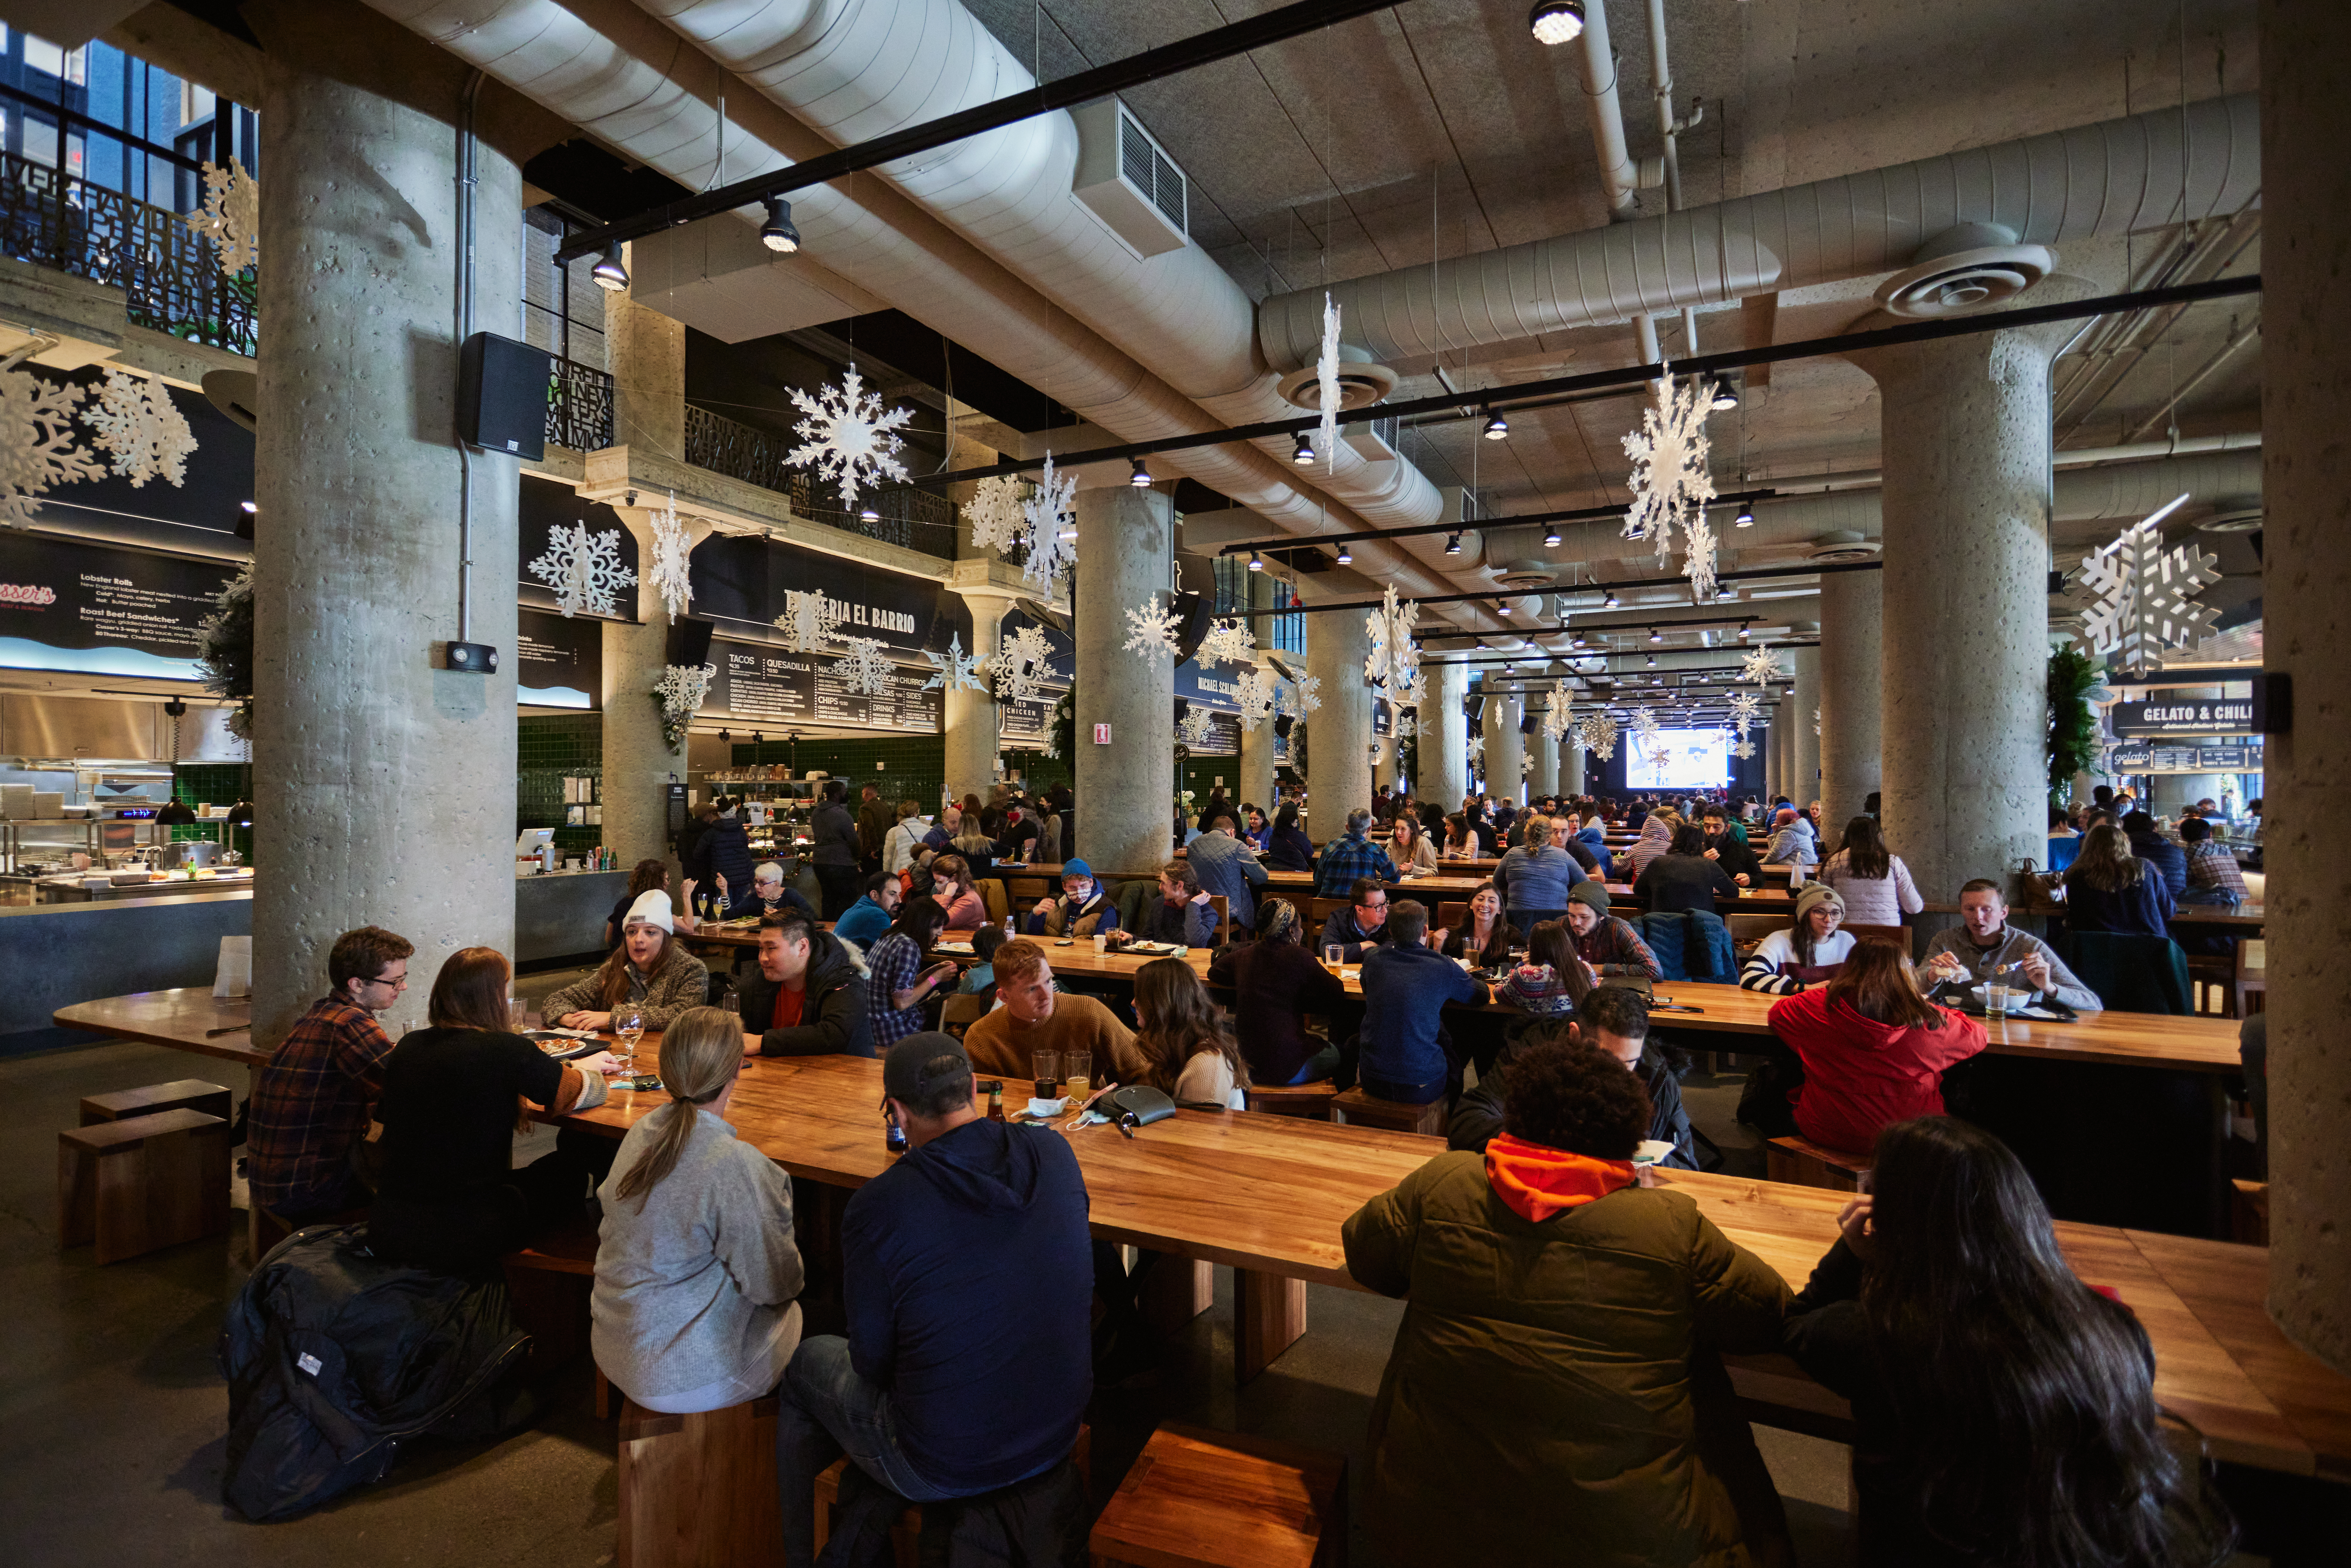 Snowflake decorations hang over long wooden tables where people eat and drink at a food hall.